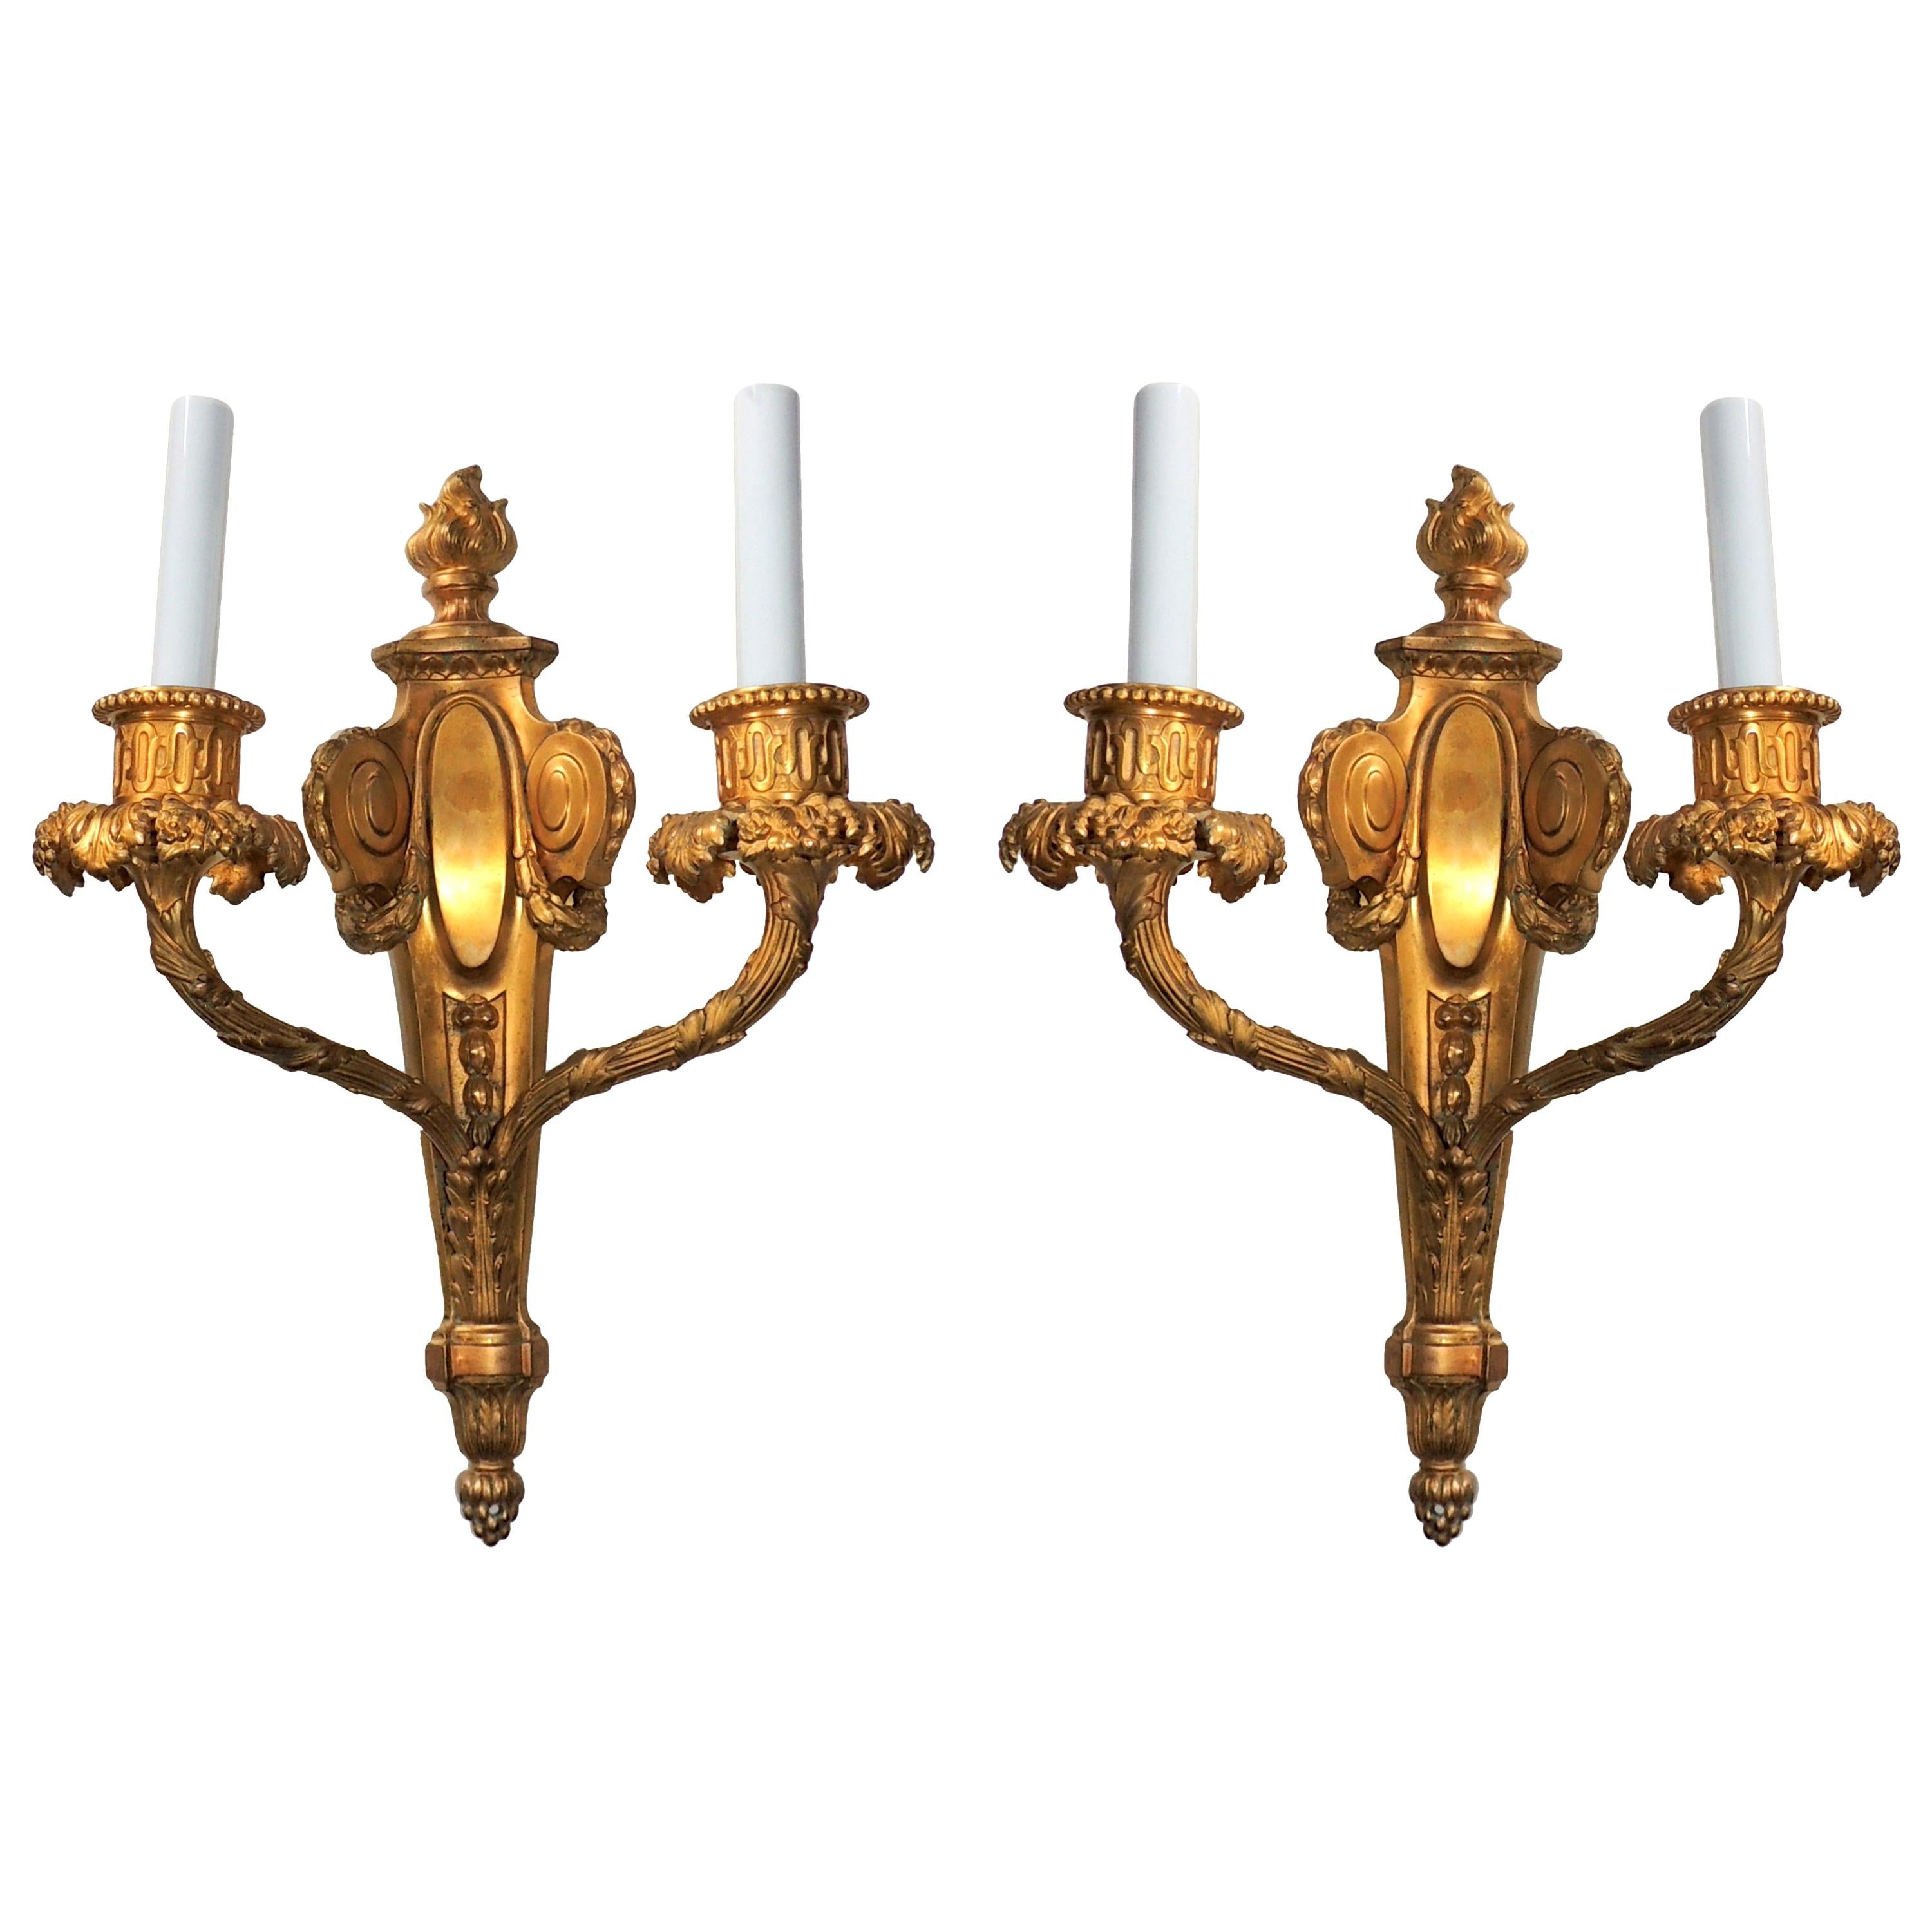 Exceptional Pair of French Doré Bronze Fine Neoclassical Flame Top Sconces For Sale